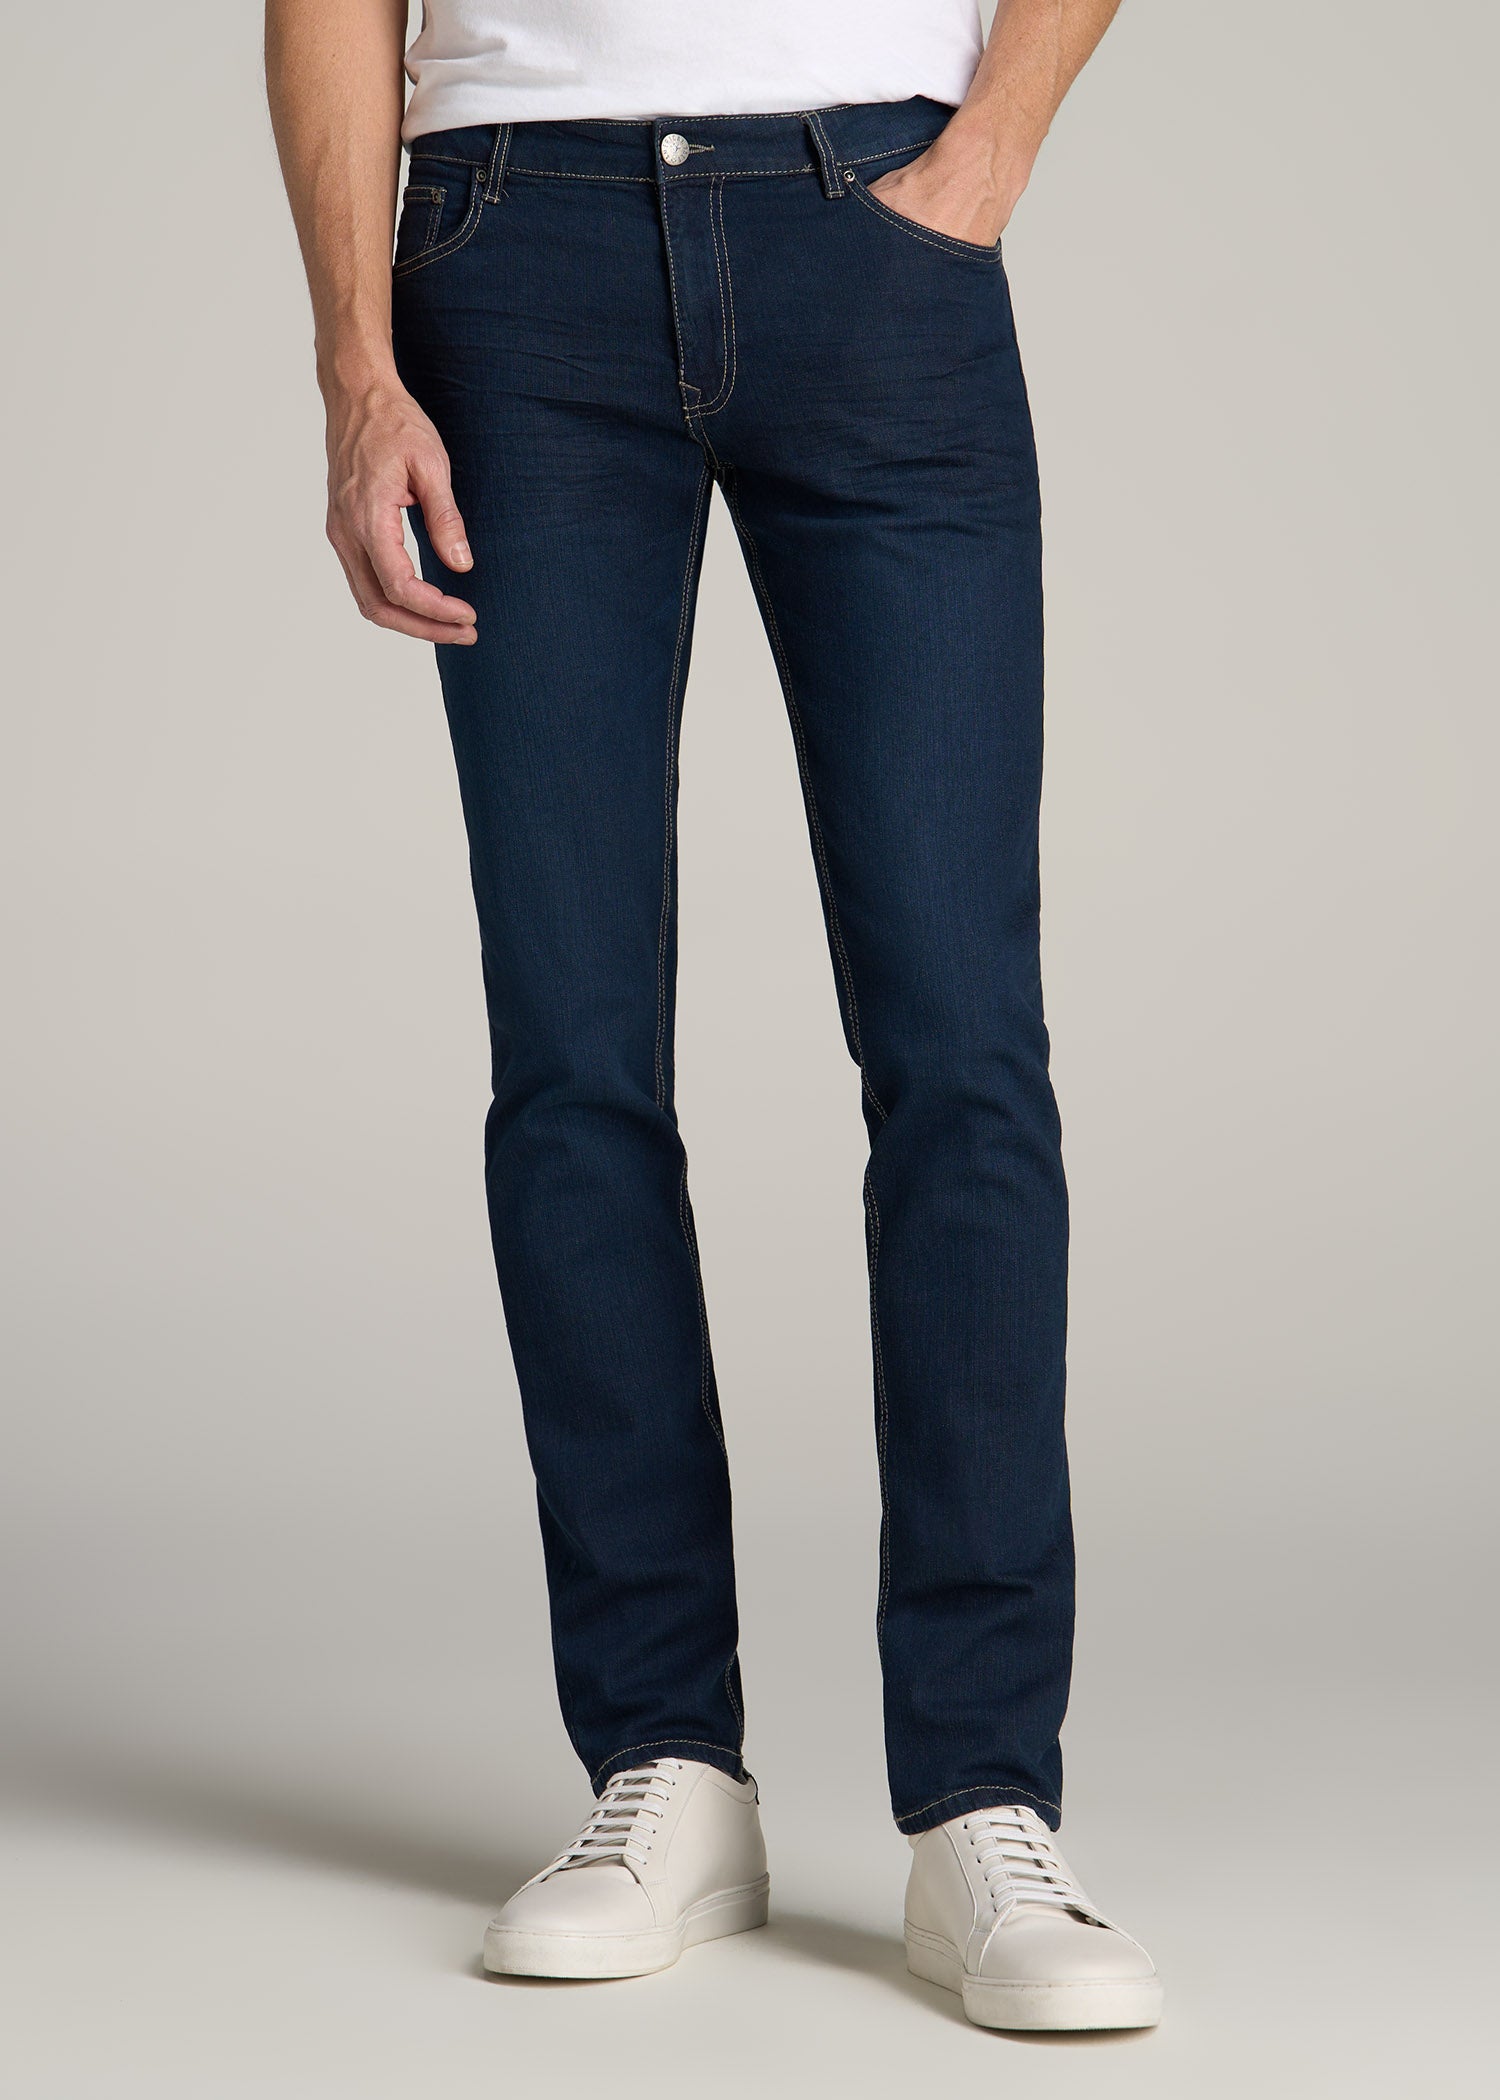 Jeans Tapered Men Tall Blue-Steel For | Carman American Tall